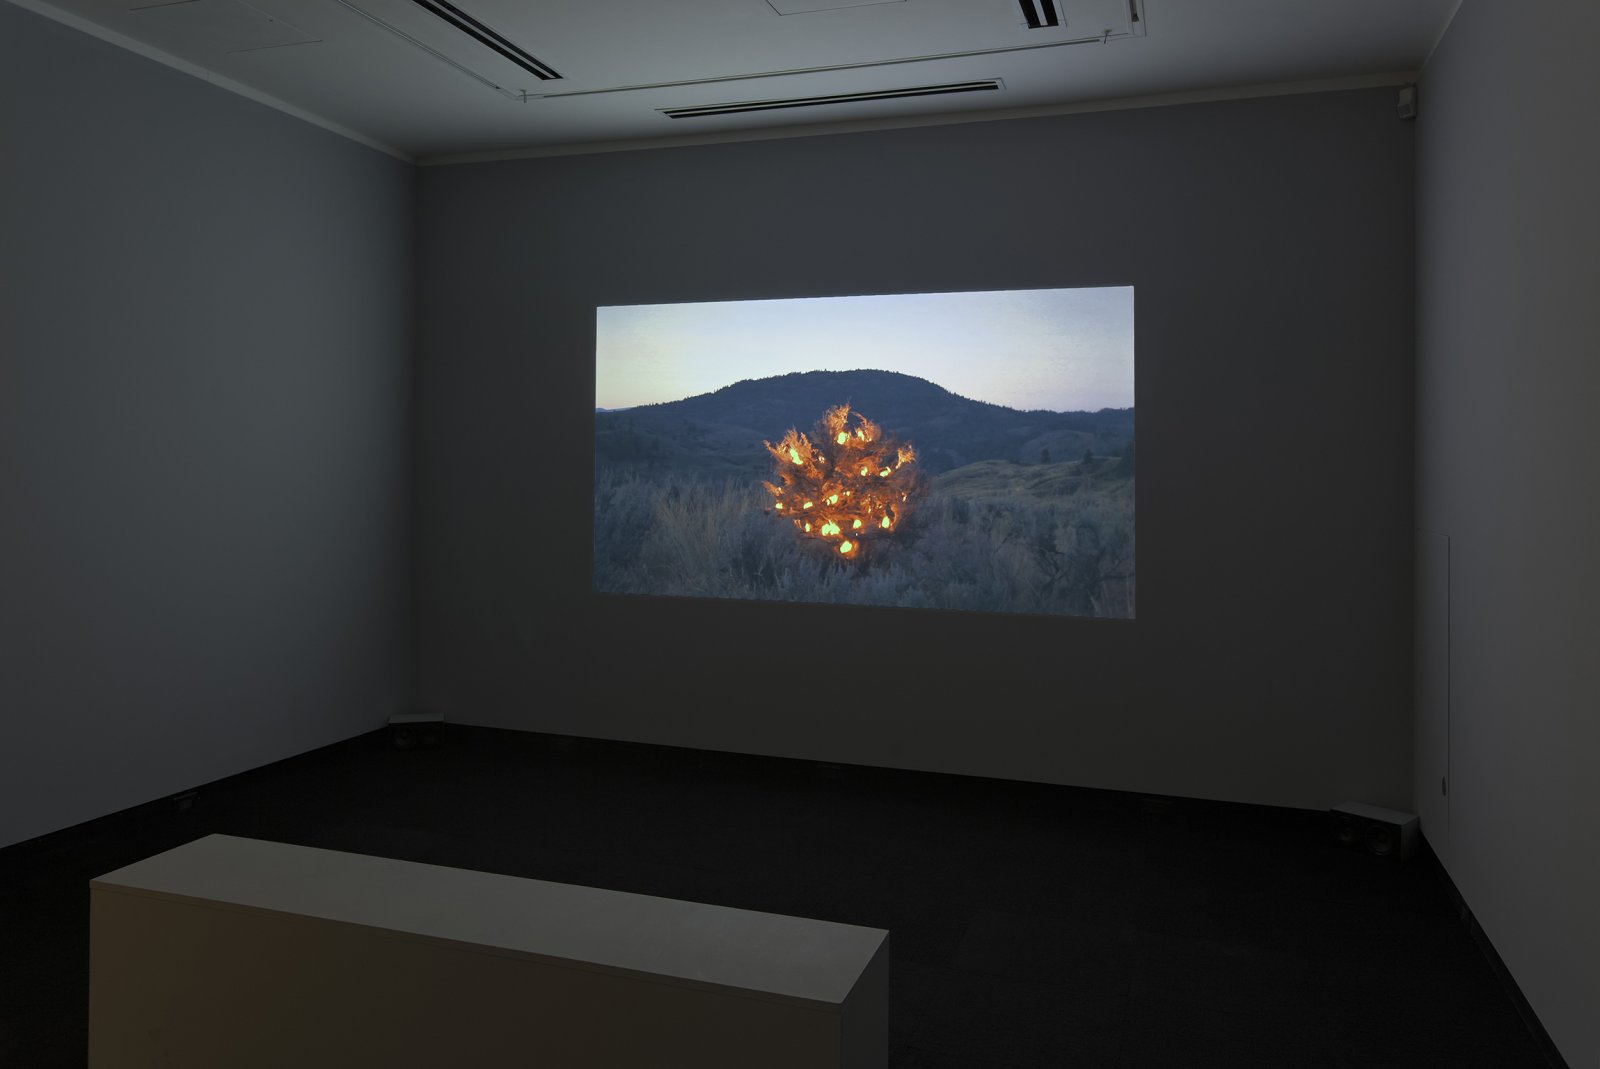 Kevin Schmidt, Burning Bush, 2005, HD video loop, 5 hours, 3 minutes. Installation view, Don't Stop Believing, Justina M. Barnicke Gallery, Toronto, 2011